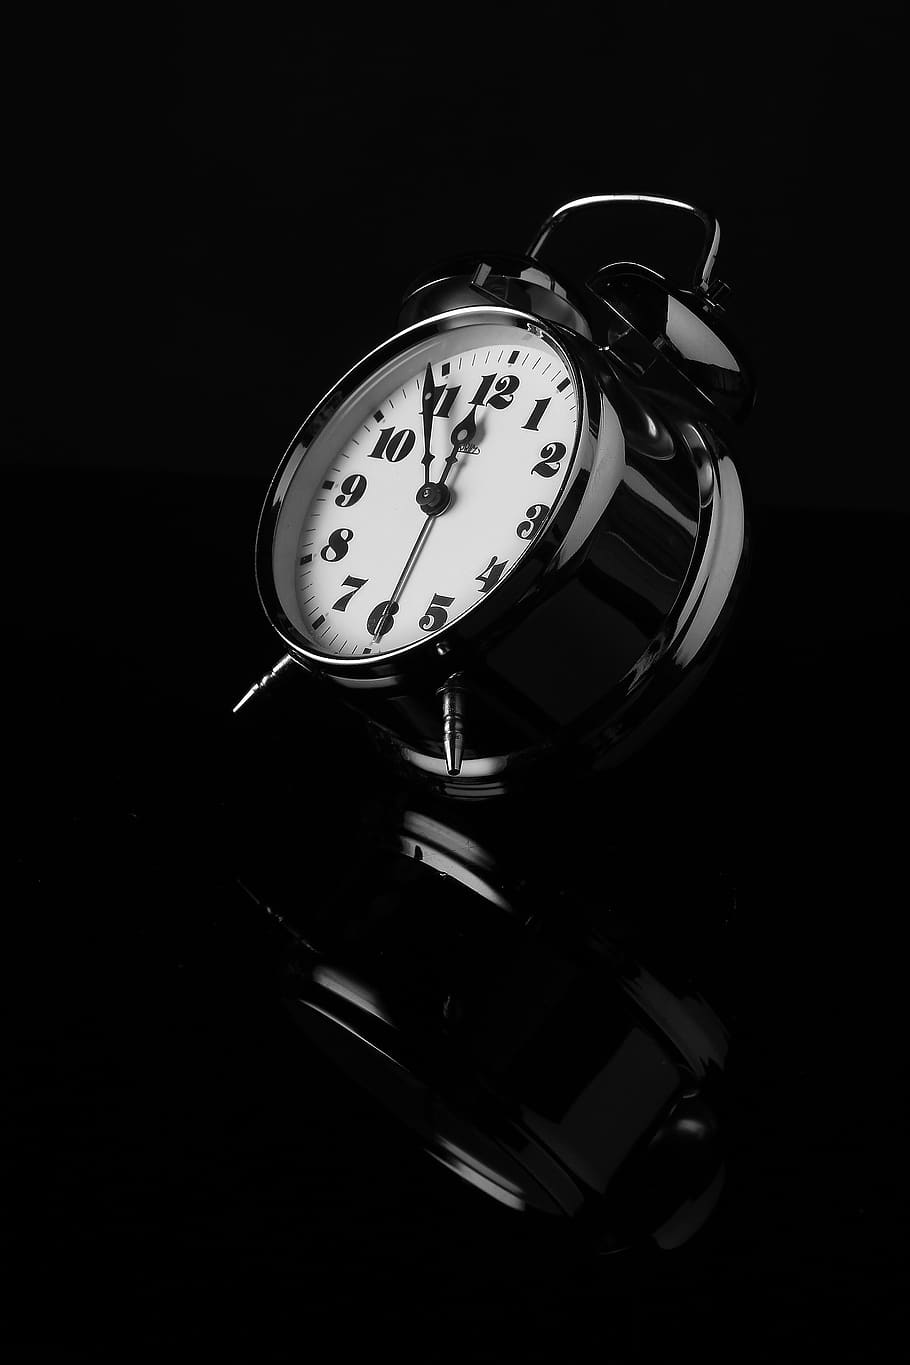 Black Analog Alarm Clock, black-and-white, reflection, time, indoors, HD wallpaper